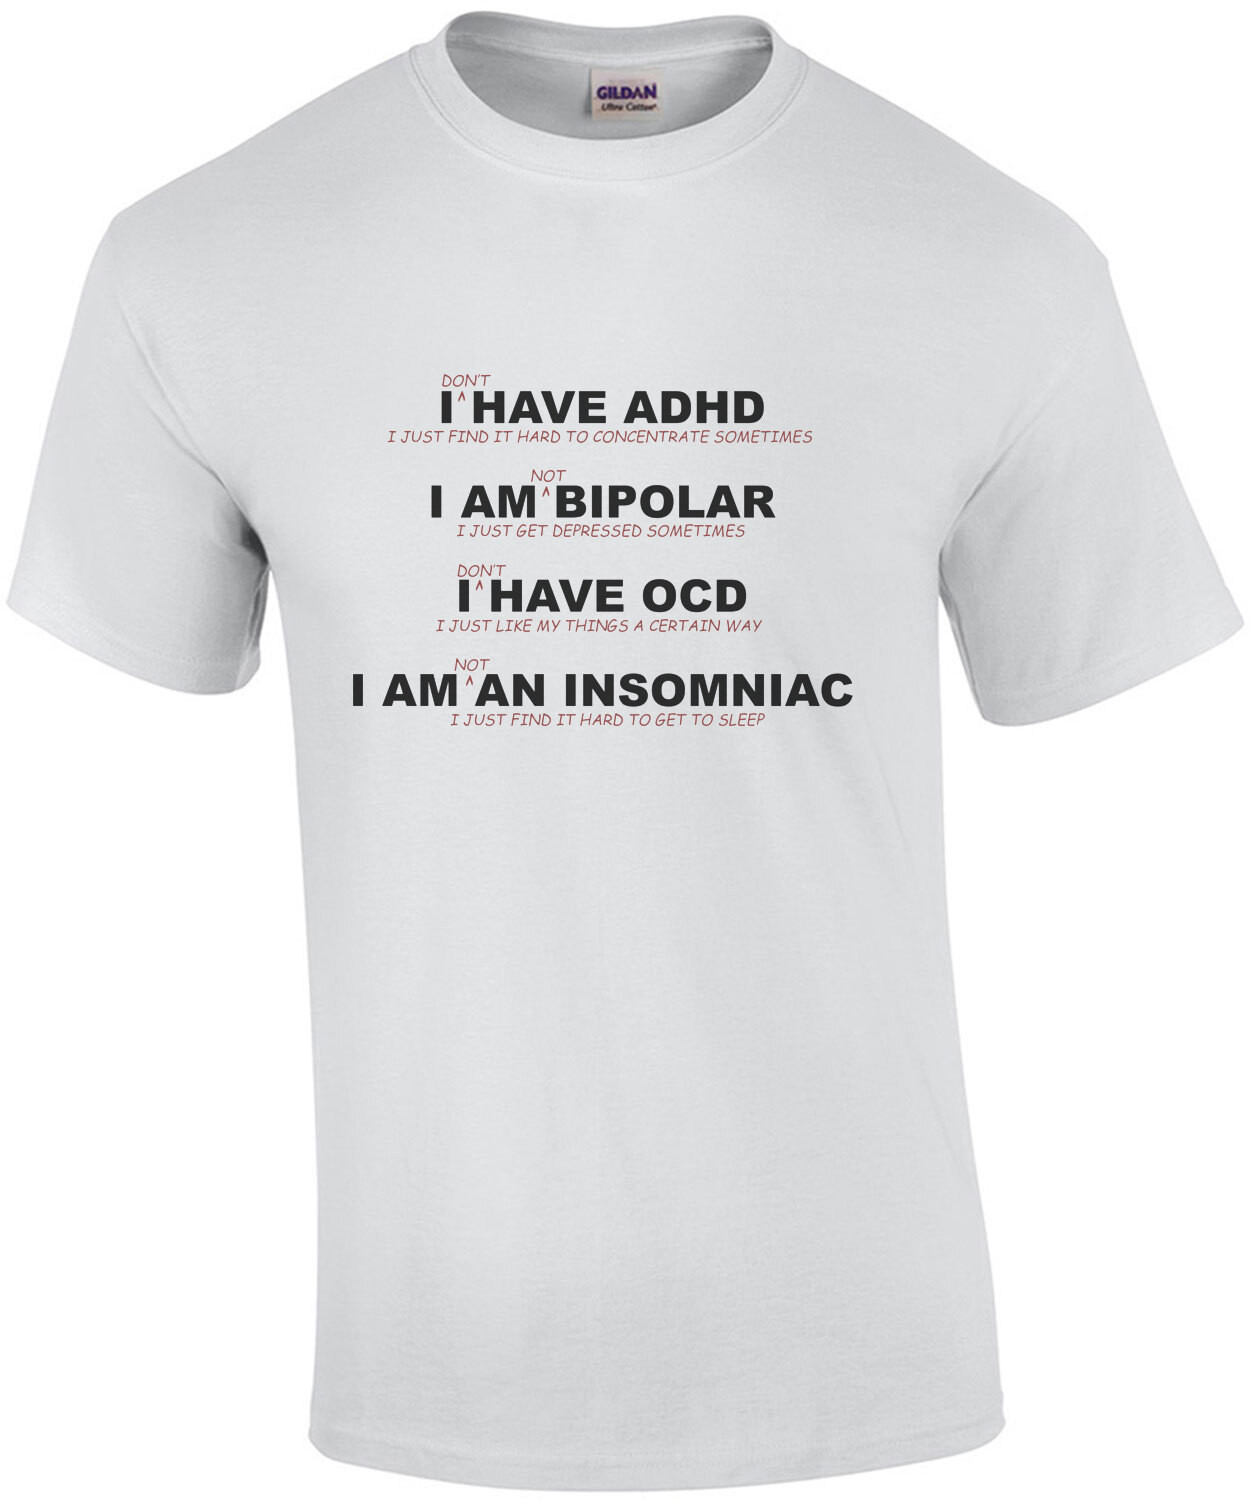 I don't have ADHD - I just find it hard to concentrate sometimes - funny t-shirt